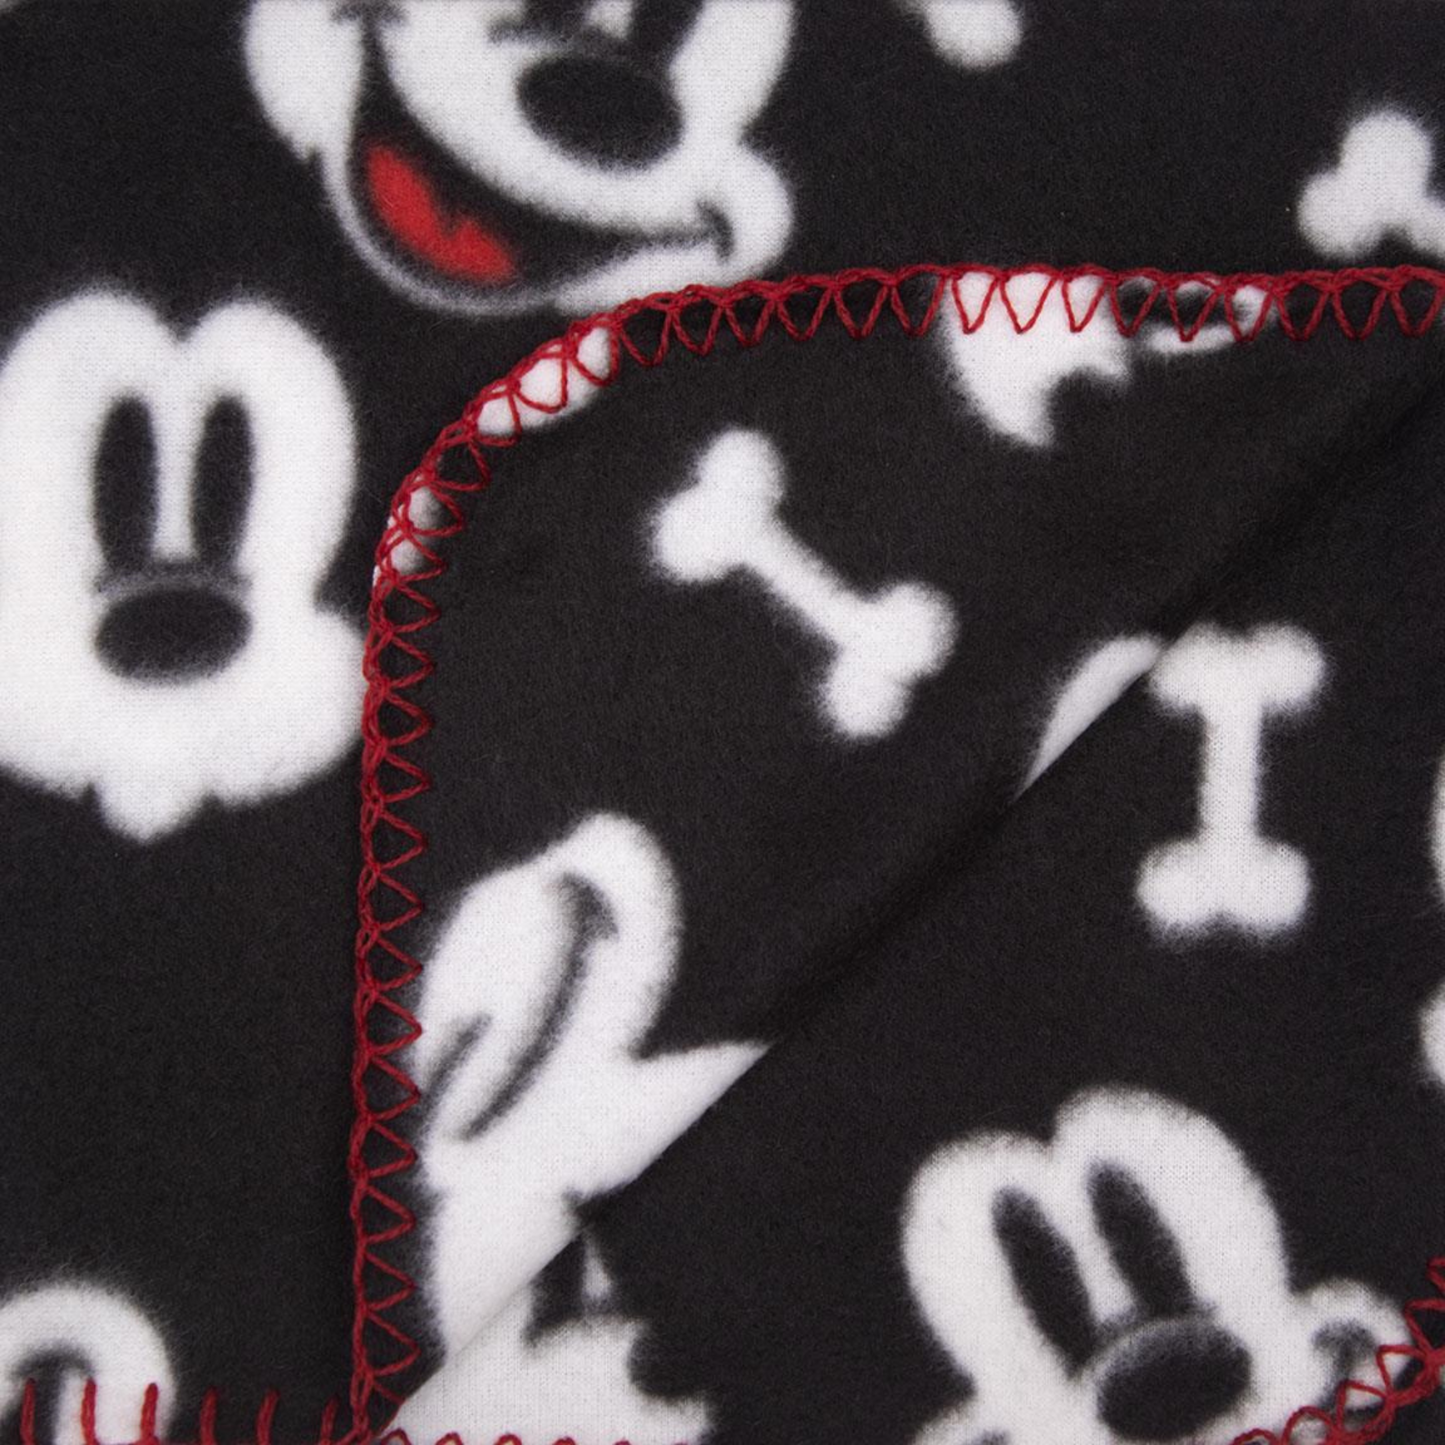 Mickey Mouse Dog Blanket